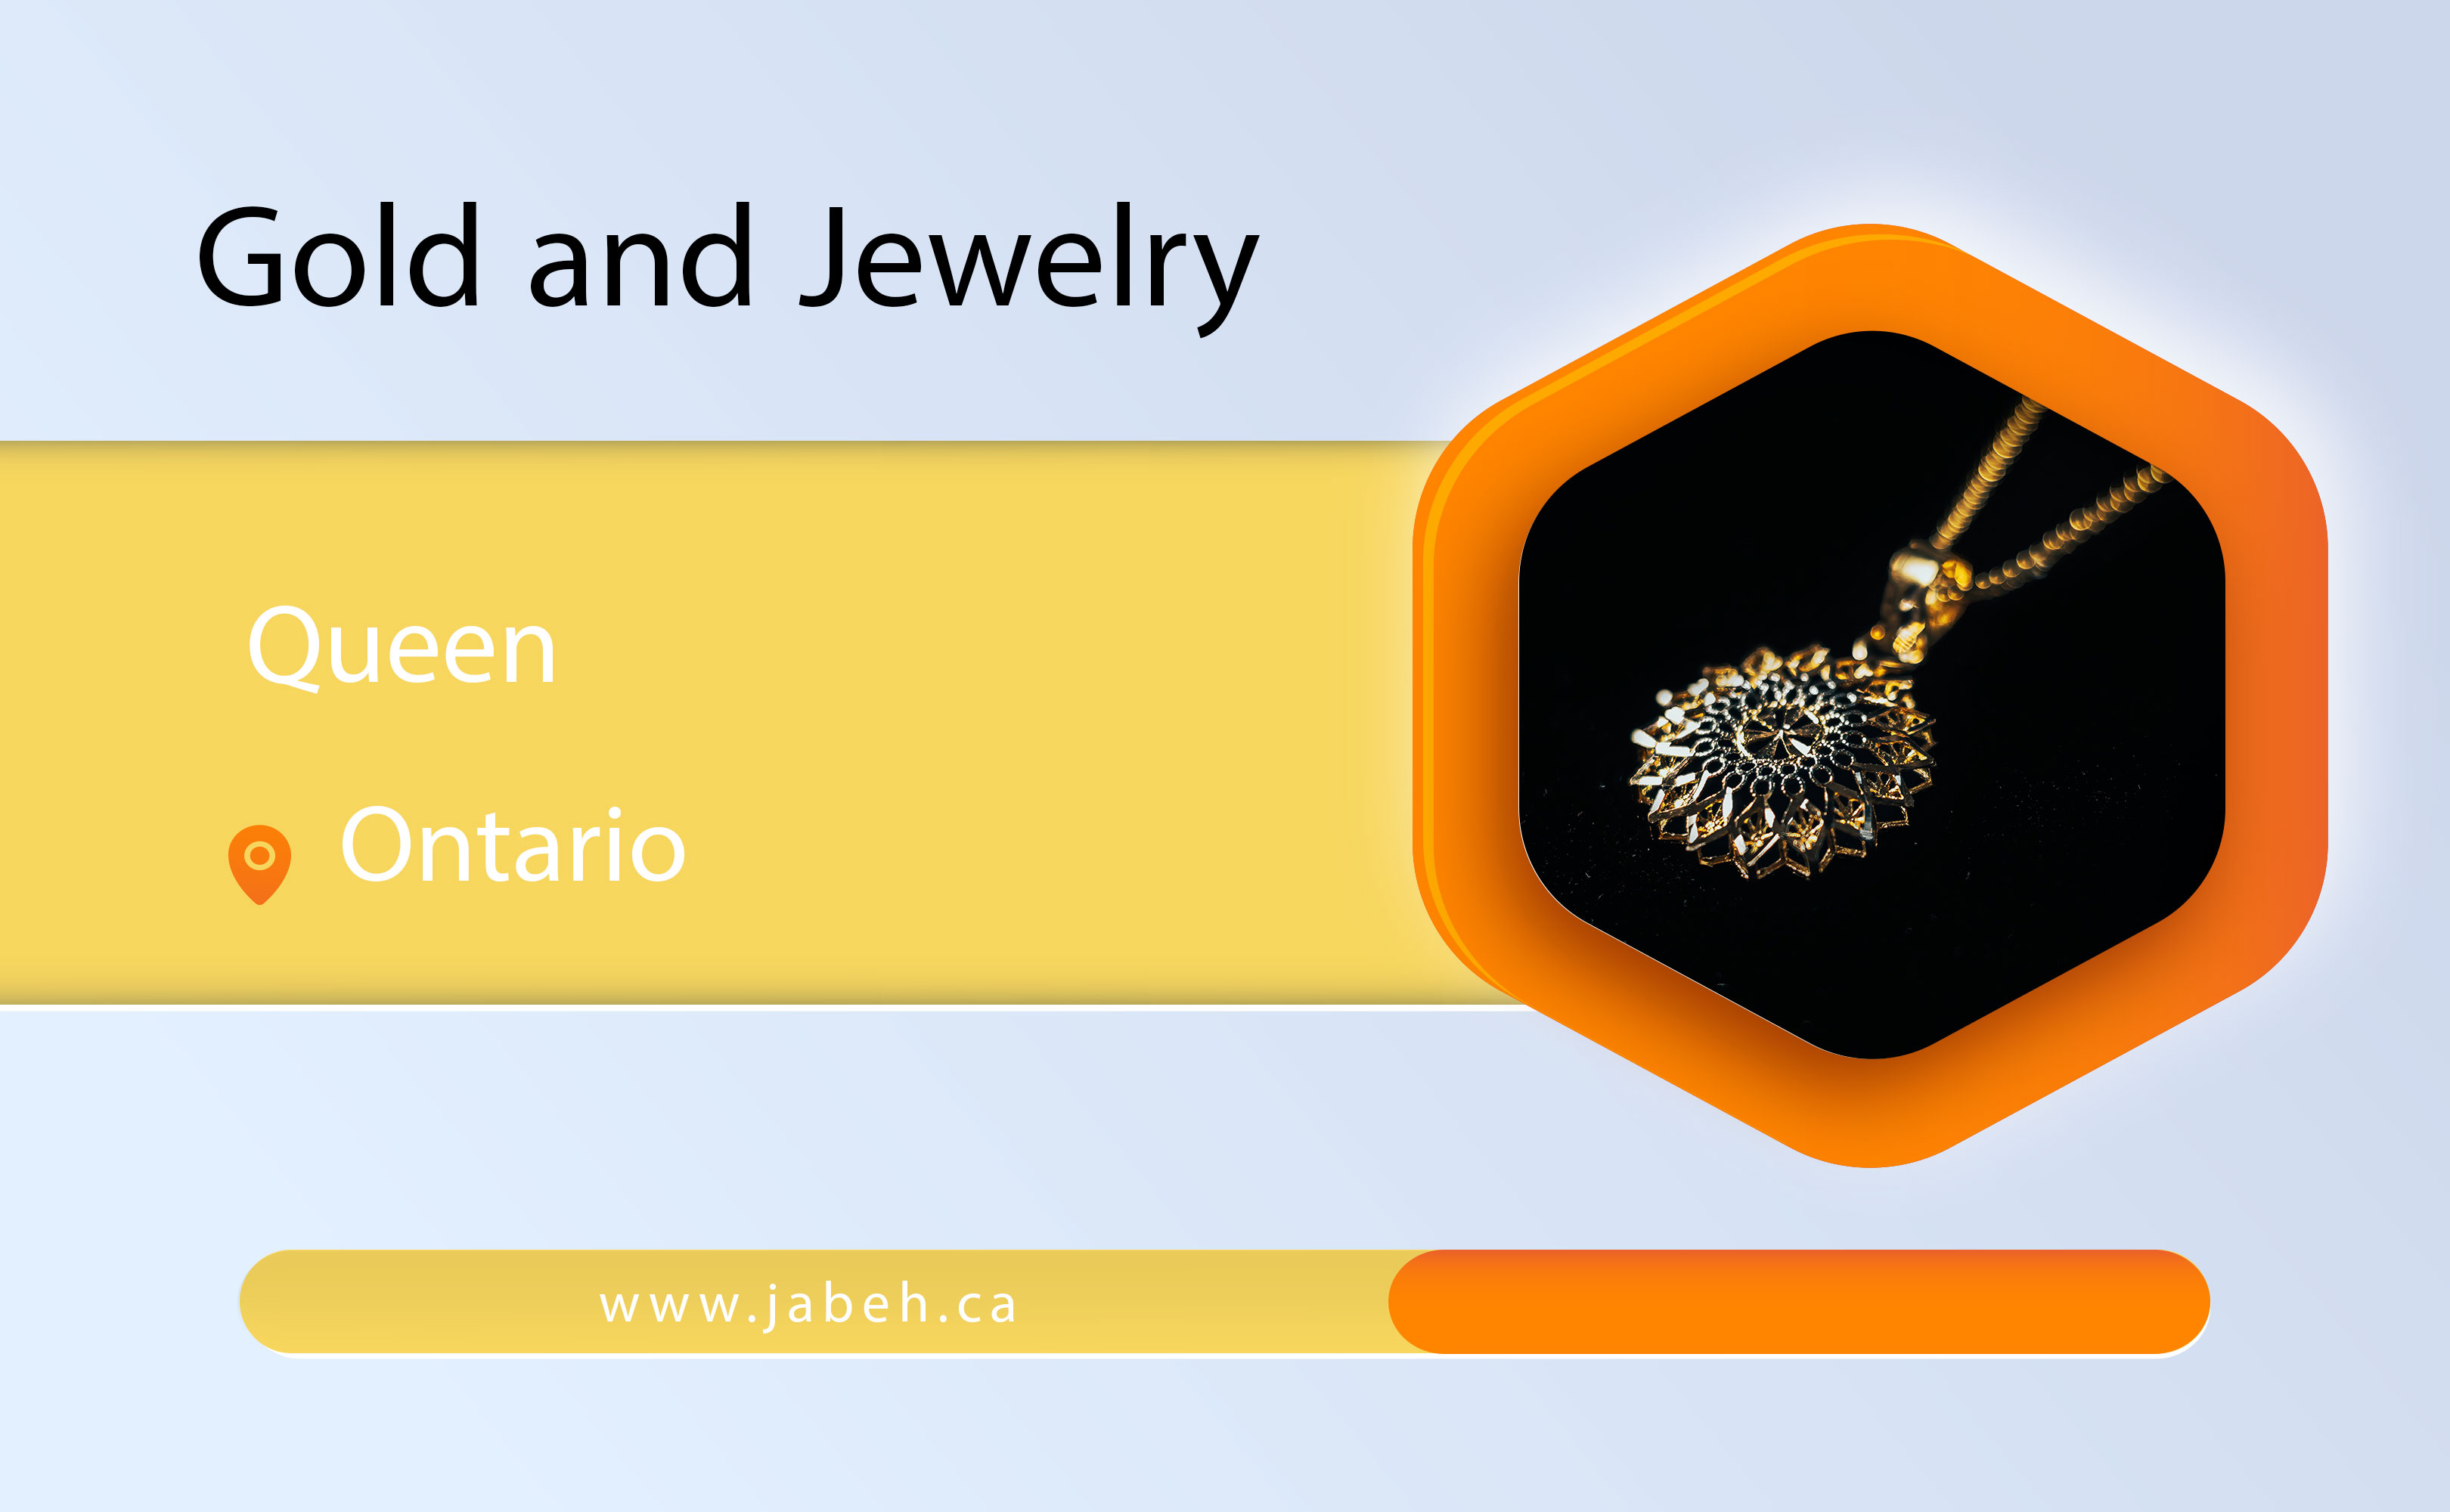 Queen Iranian gold and jewelry in Ontario